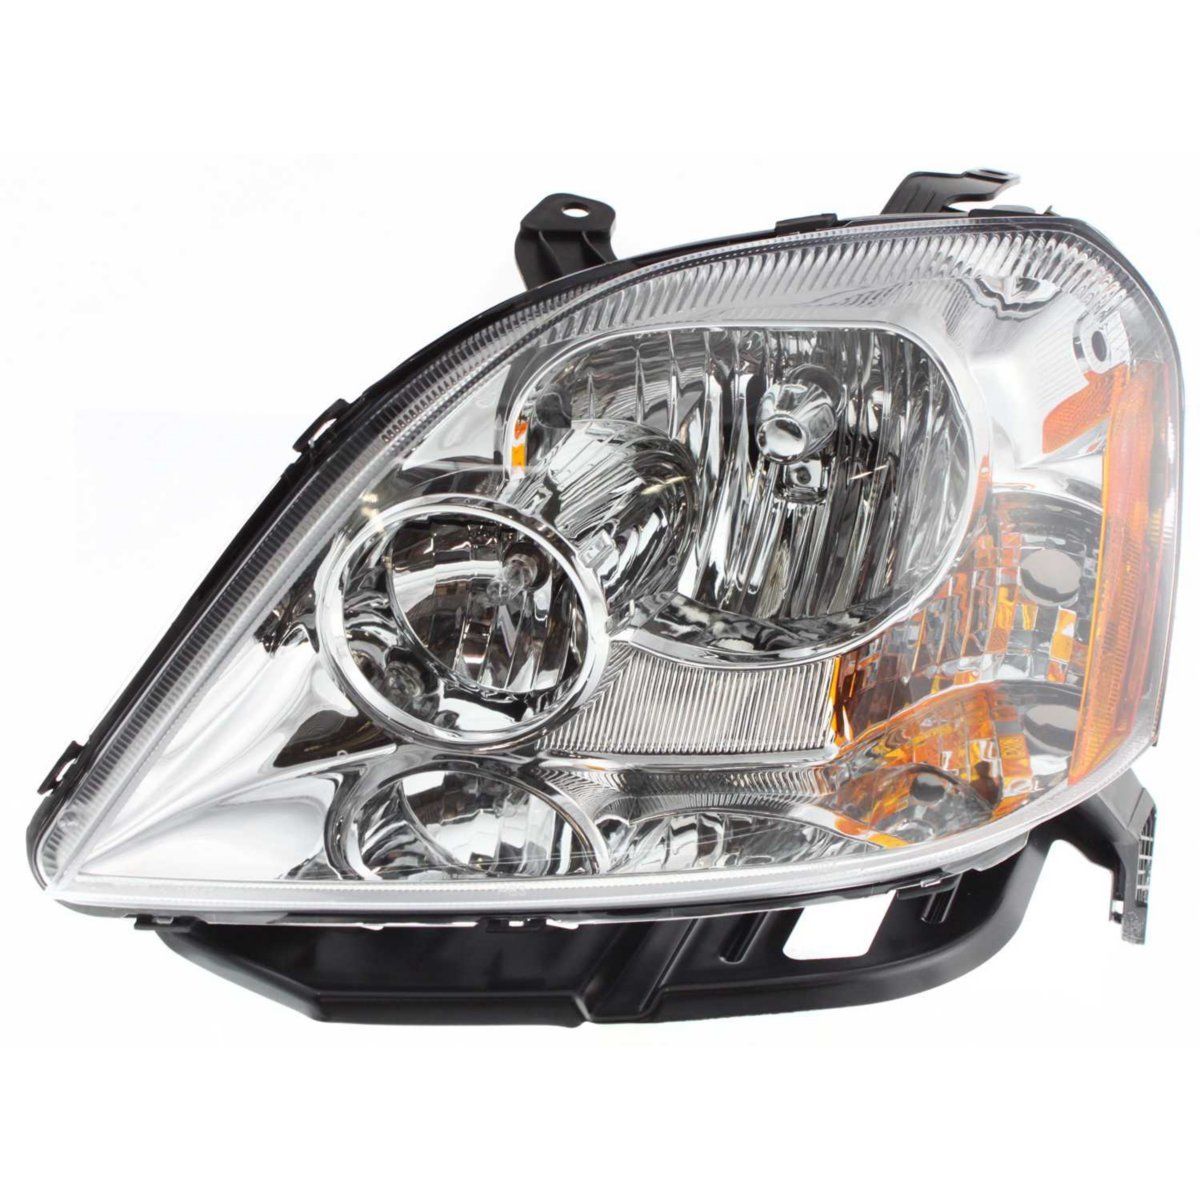 Headlight For 2005-2007 Ford Five Hundred Driver Side w/ bulb | eBay Headlight Bulb For 2005 Ford Five Hundred